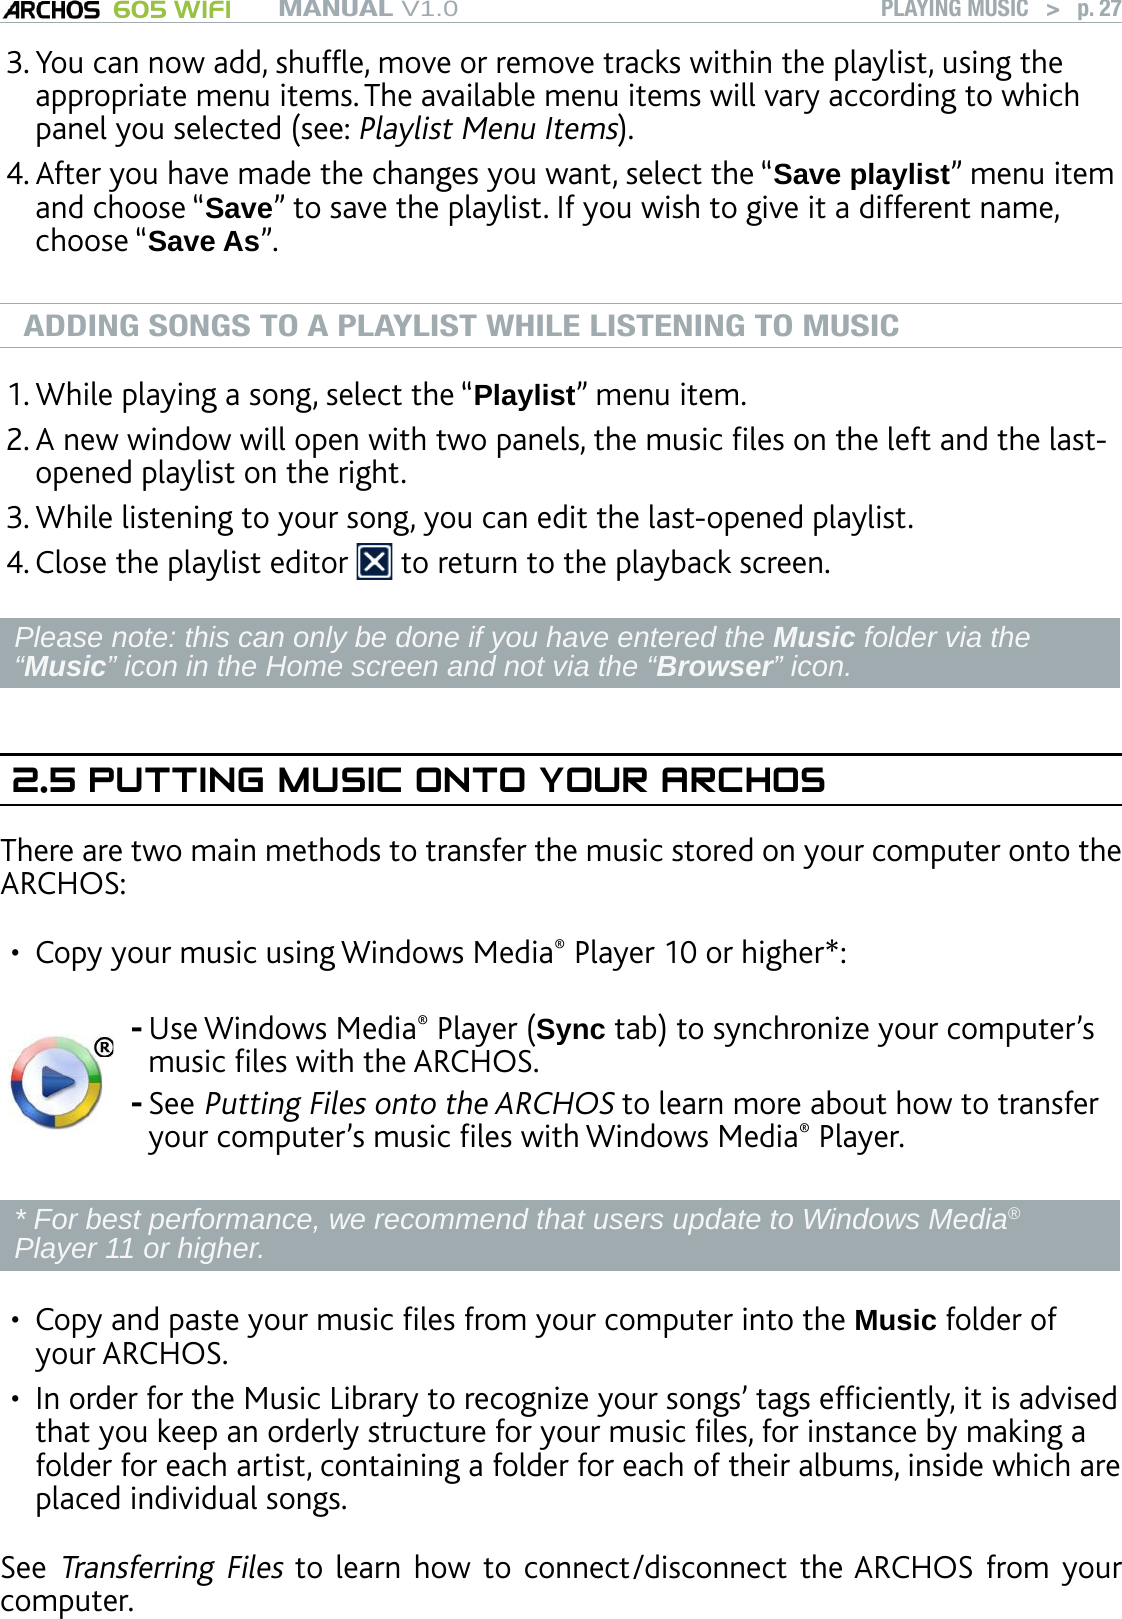 MANUAL V1.0 605 WIFI PLAYING MUSIC   &gt;   p. 27You can now add, shufe, move or remove tracks within the playlist, using the appropriate menu items. The available menu items will vary according to which panel you selected (see: Playlist Menu Items). After you have made the changes you want, select the “Save playlist” menu item and choose “Save” to save the playlist. If you wish to give it a different name, choose “Save As”.ADDING SONGS TO A PLAYLIST WHILE LISTENING TO MUSICWhile playing a song, select the “Playlist” menu item.A new window will open with two panels, the music les on the left and the last-opened playlist on the right.While listening to your song, you can edit the last-opened playlist.Close the playlist editor   to return to the playback screen.Please note: this can only be done if you have entered the Music folder via the “Music” icon in the Home screen and not via the “Browser” icon.2.5 PUTTING MUSIC ONTO YOUR ARCHOSThere are two main methods to transfer the music stored on your computer onto the ARCHOS:Copy your music using Windows Media® Player 10 or higher*:Use Windows Media® Player (Sync tab) to synchronize your computer’s music les with the ARCHOS.See Putting Files onto the ARCHOS to learn more about how to transfer your computer’s music les with Windows Media® Player.--* For best performance, we recommend that users update to Windows Media® Player 11 or higher.Copy and paste your music les from your computer into the Music folder of your ARCHOS.In order for the Music Library to recognize your songs’ tags efciently, it is advised that you keep an orderly structure for your music les, for instance by making a folder for each artist, containing a folder for each of their albums, inside which are placed individual songs.See Transferring Files to learn how to  connect/disconnect  the ARCHOS from your computer.3.4.1.2.3.4.•••